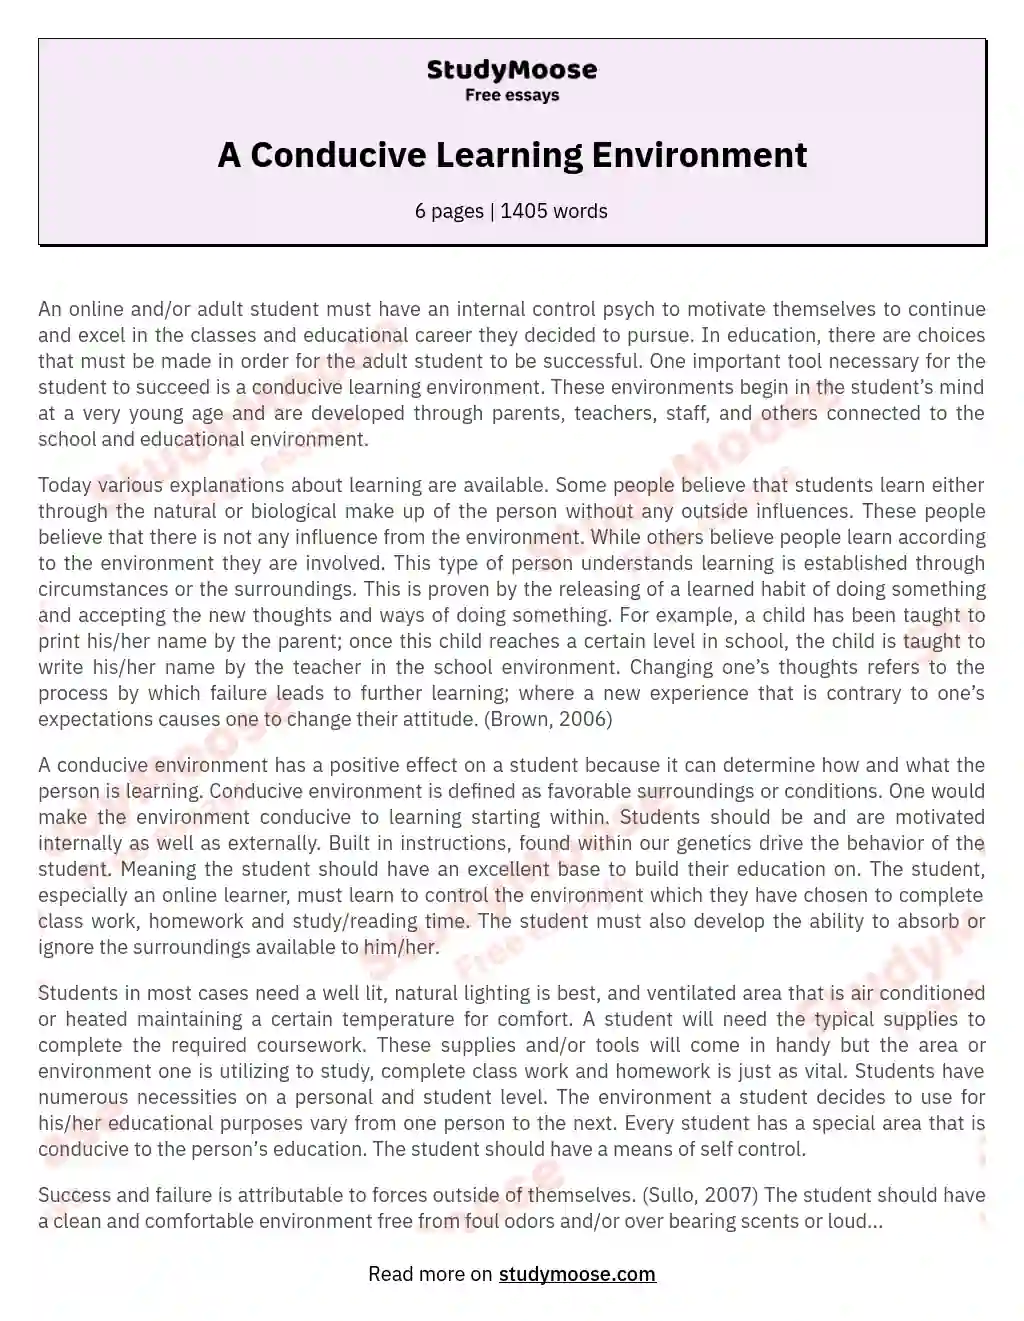 A Conducive Learning Environment essay